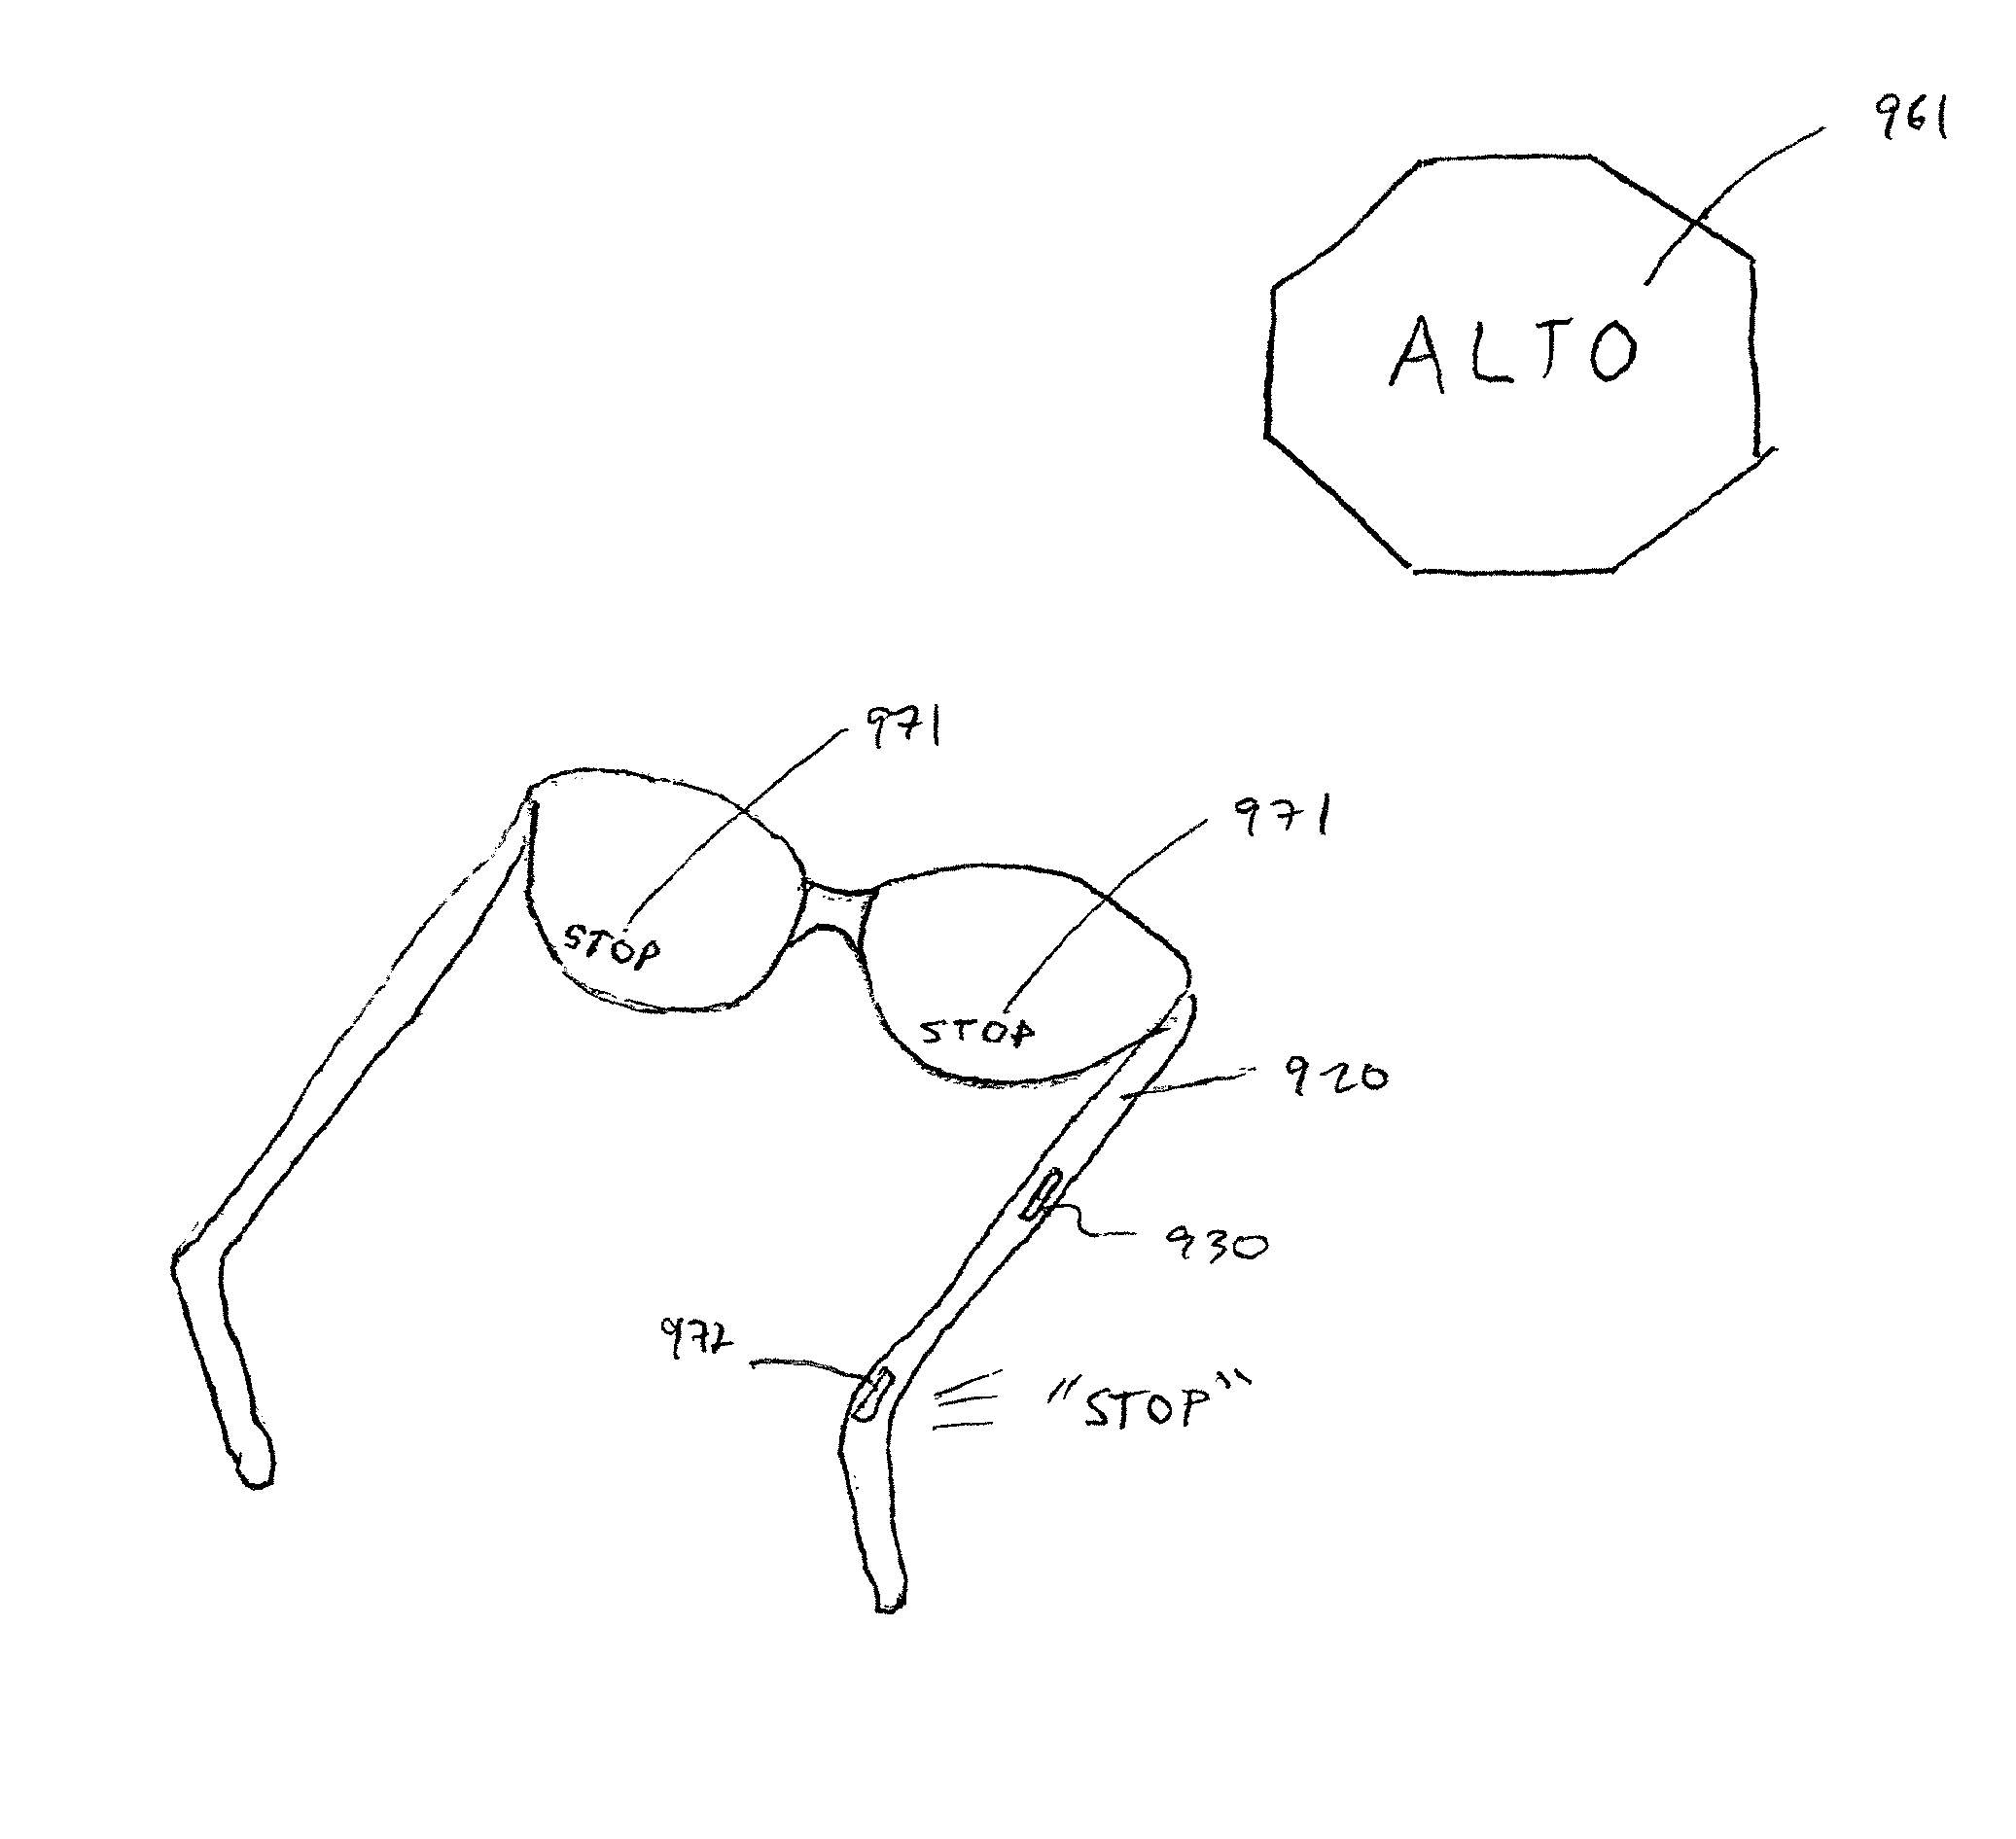 Multicomponent optical device for visual and audible translation and recognition